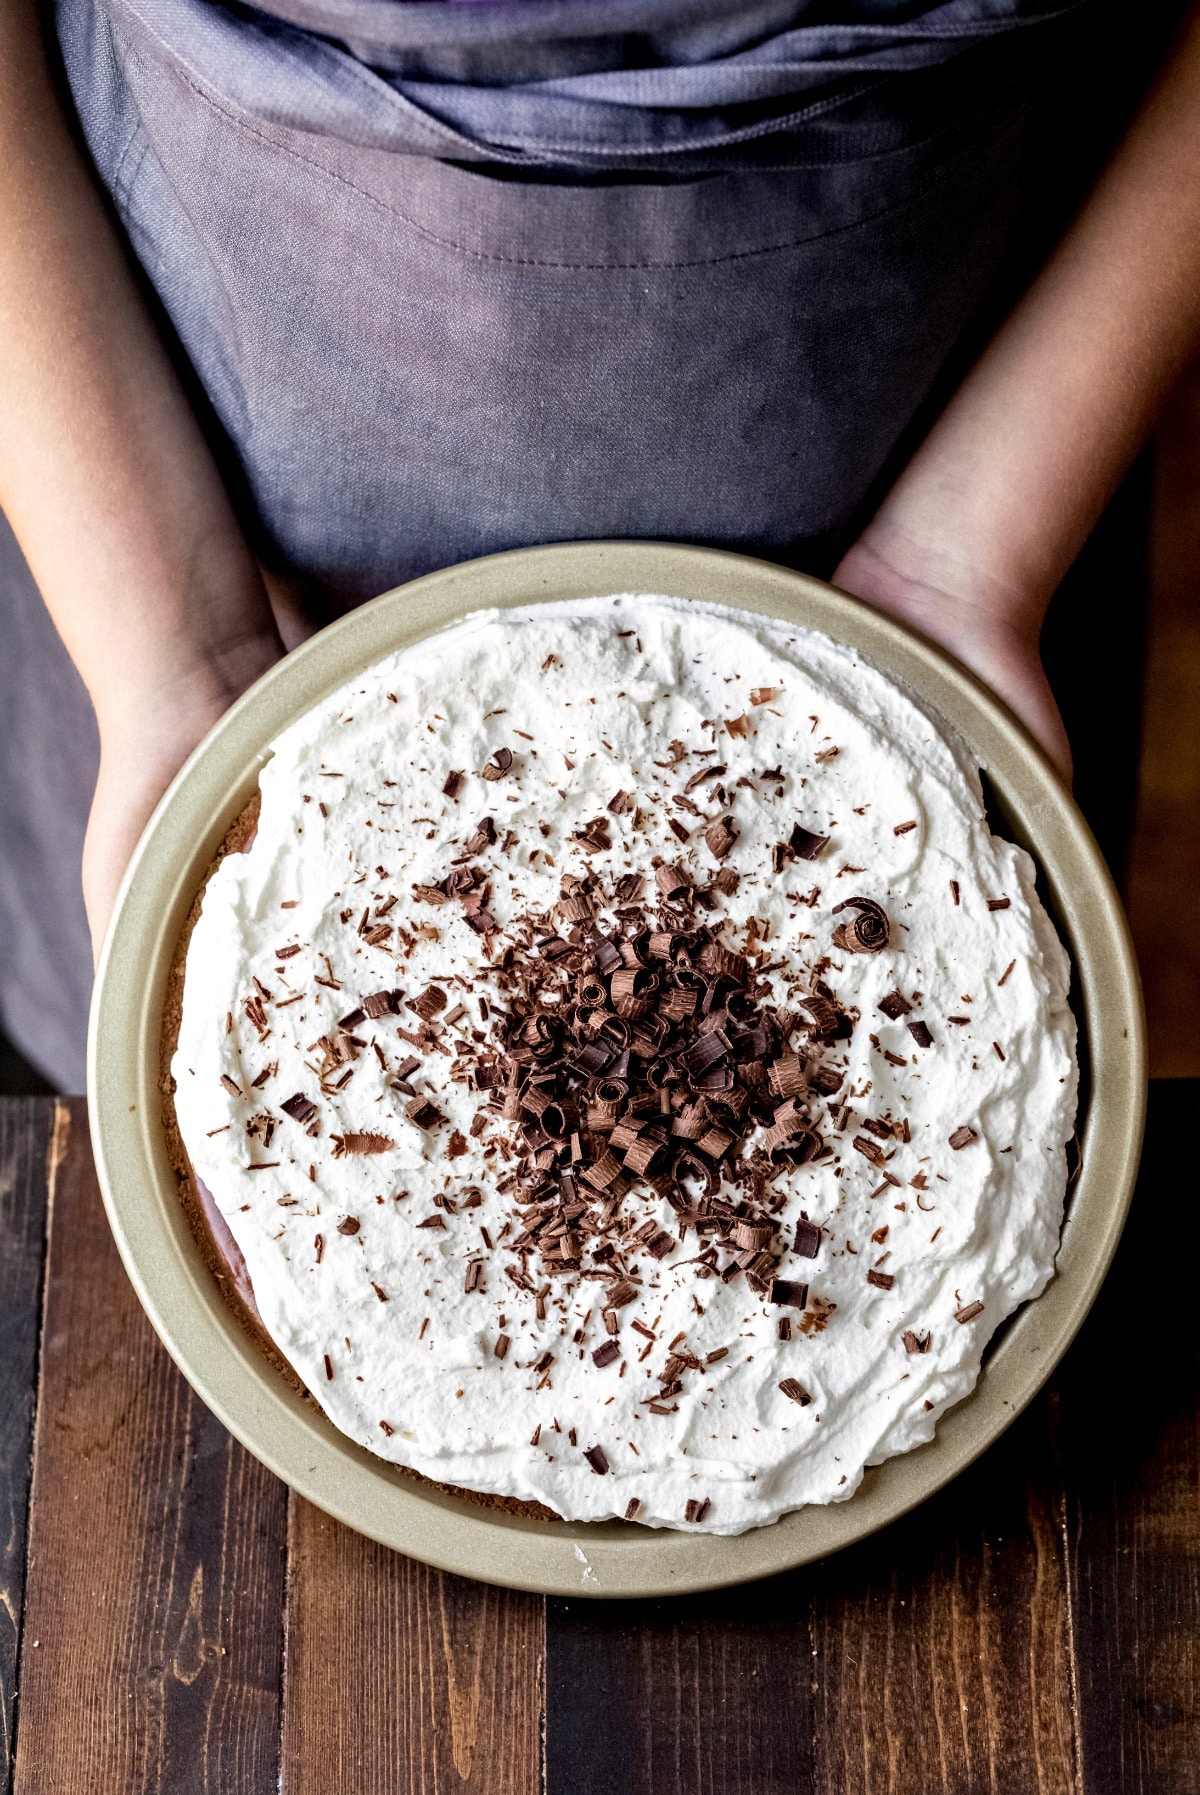 Two hands holding a no bake chocolate pie in a pan